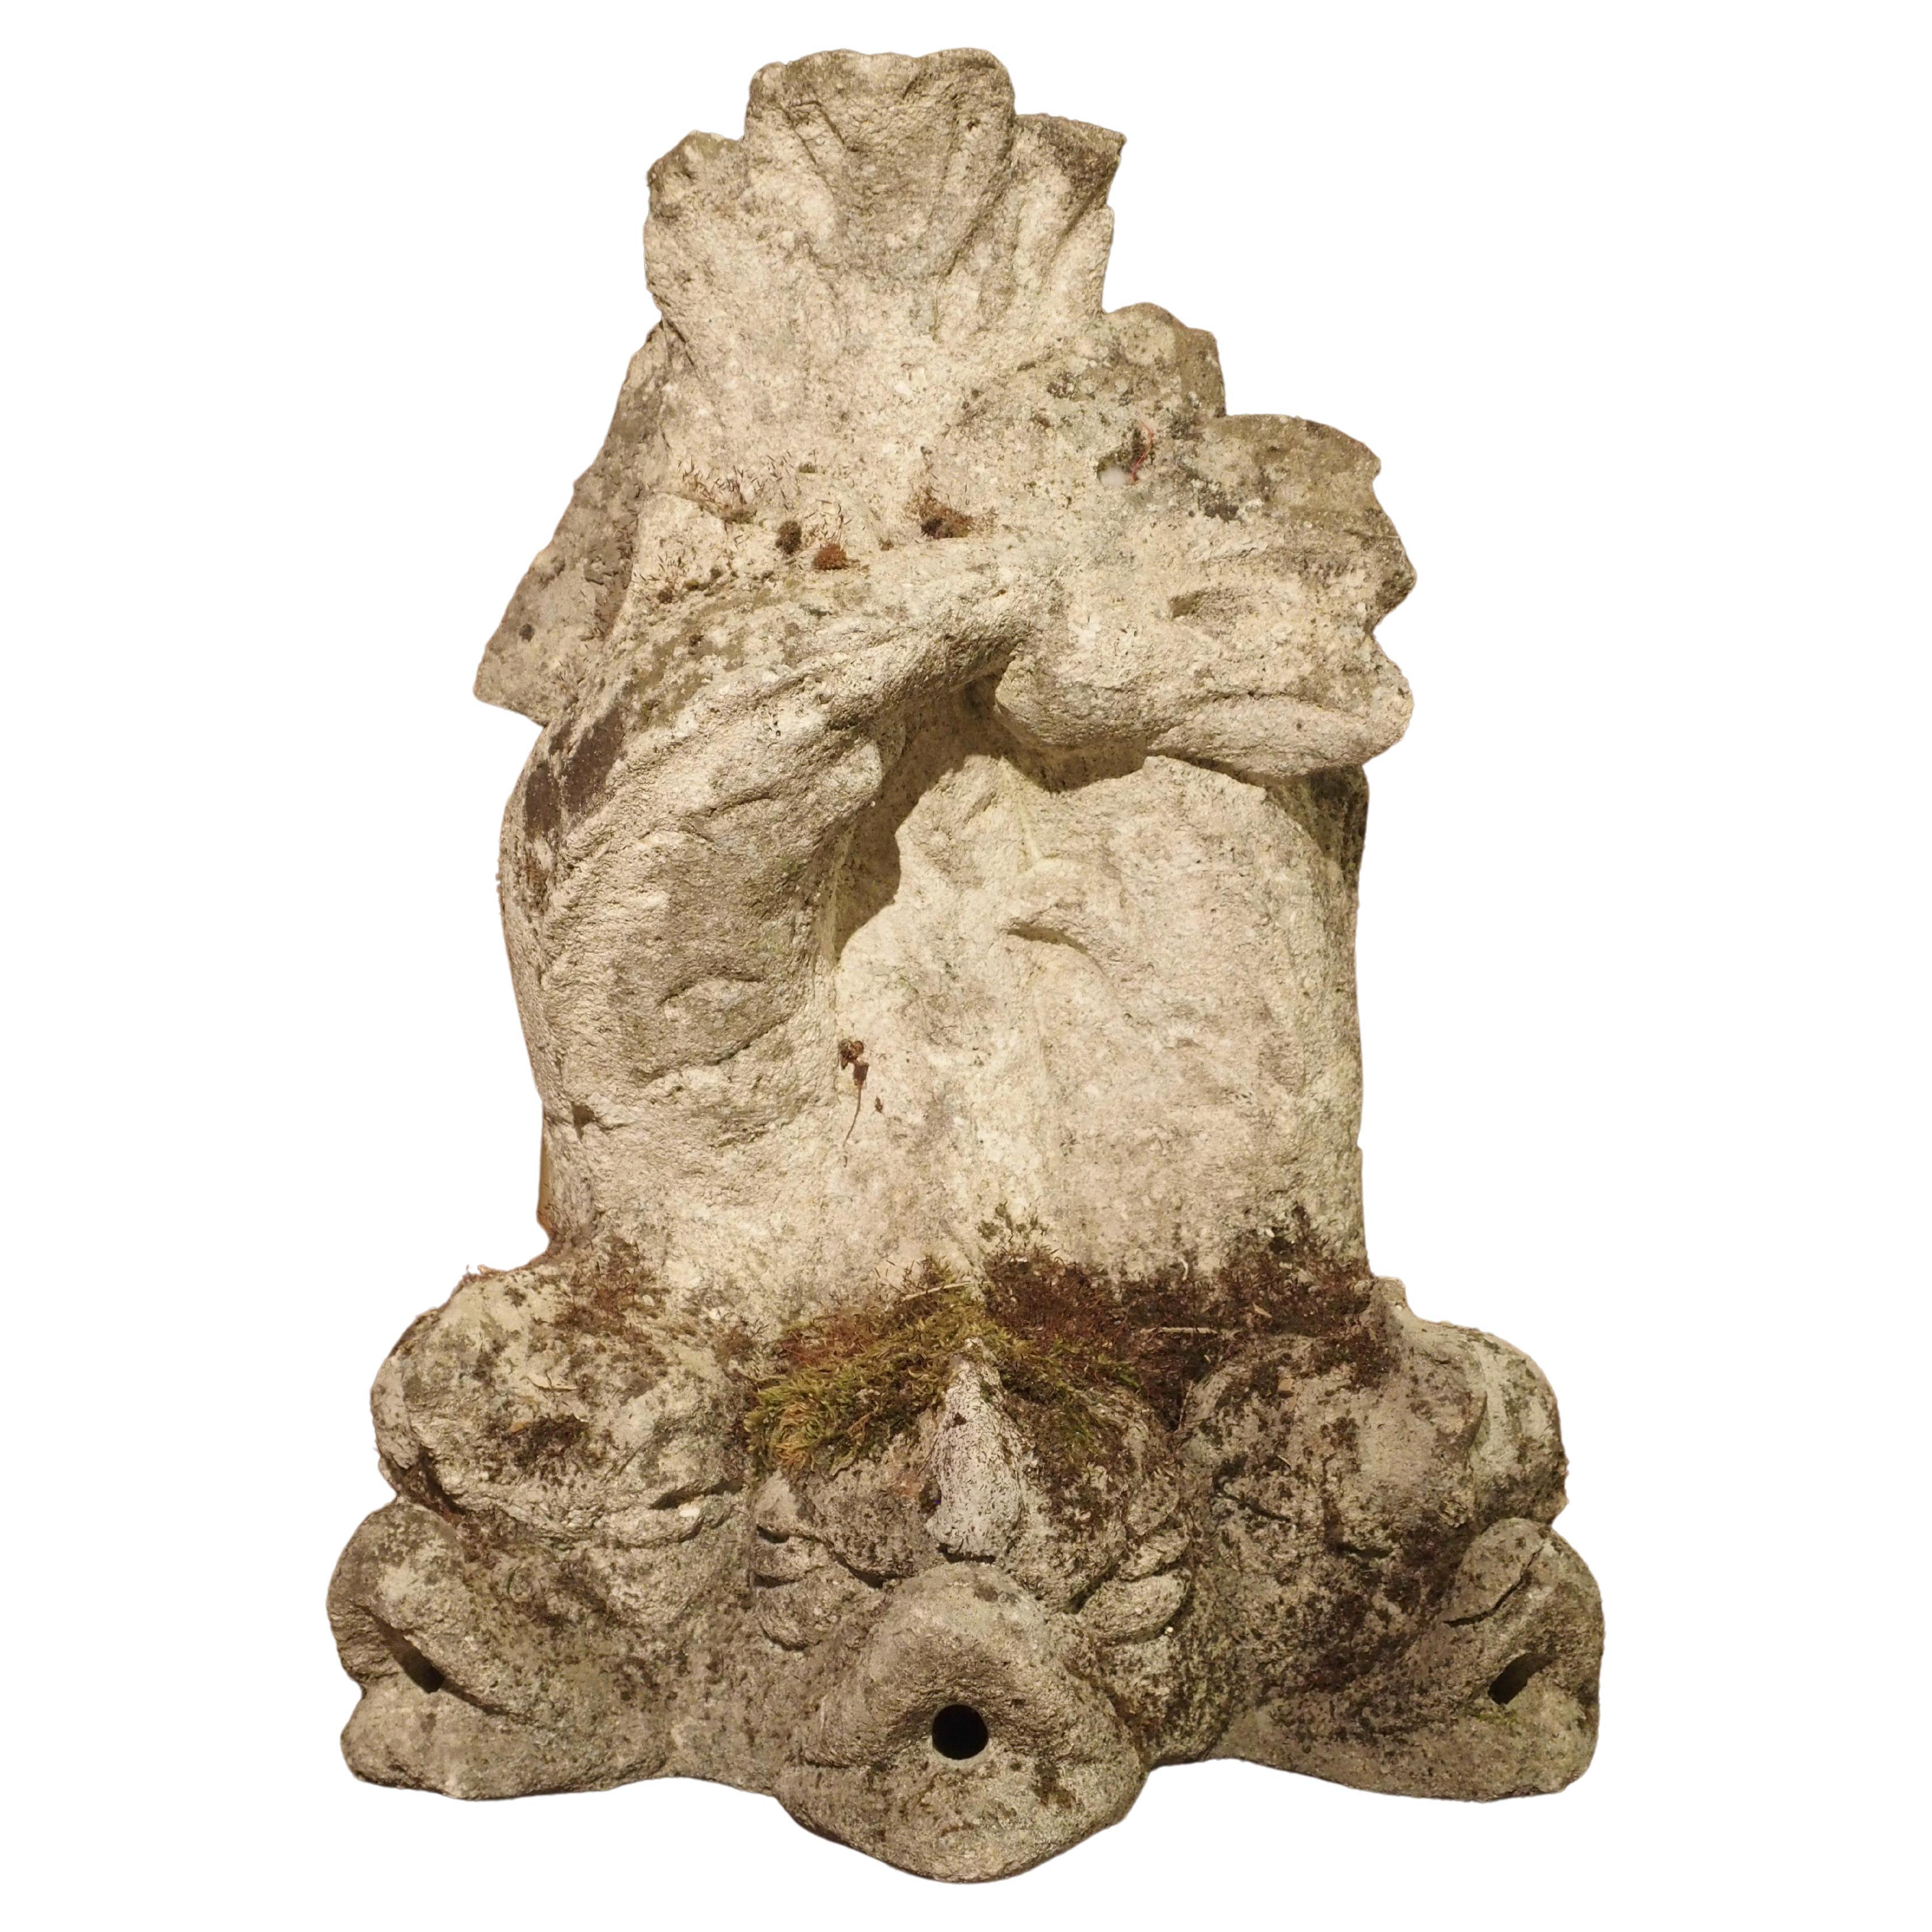 Antique French Stone Fountain Piece with Triple Dolphin Spouts, Circa 1900